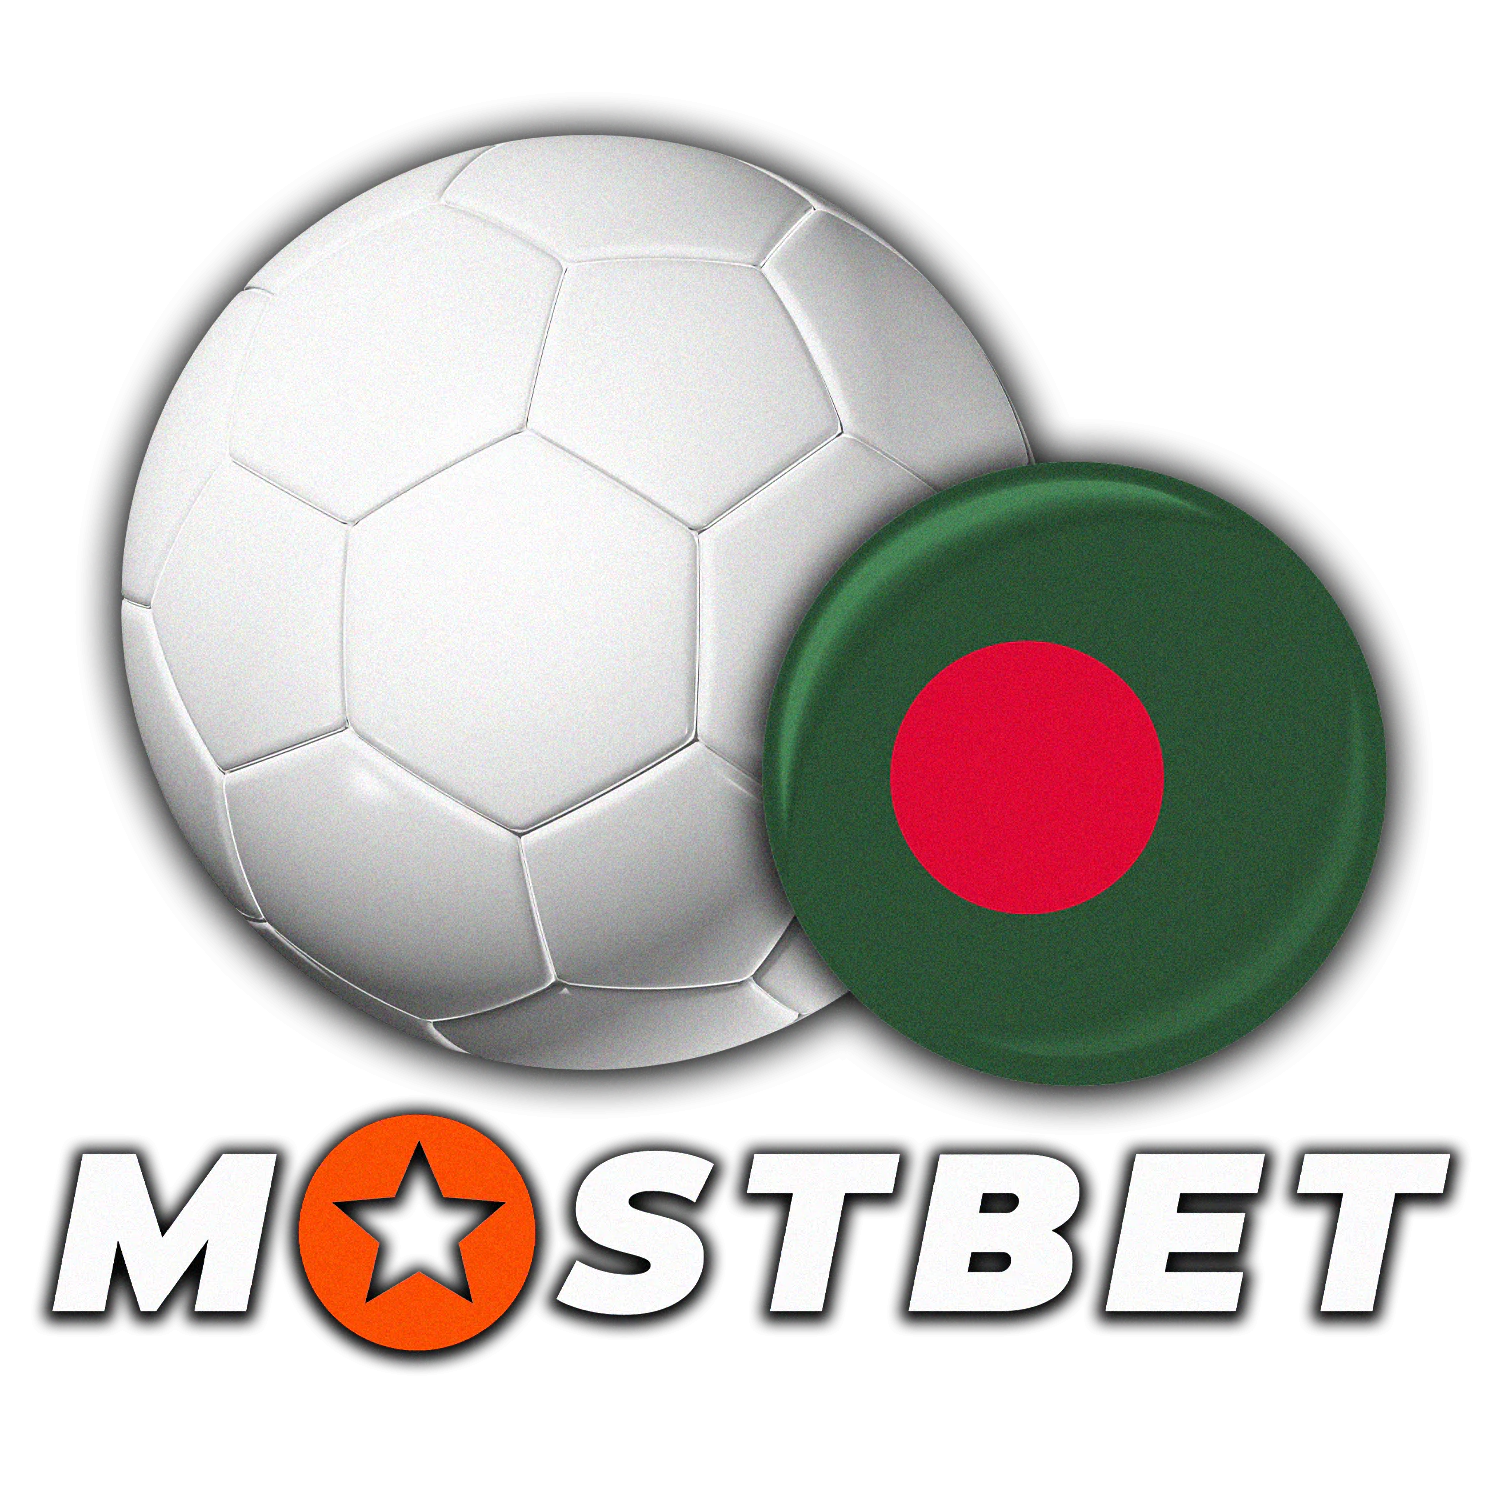 5 Habits Of Highly Effective Mostbet bookmaker and online casino in Azerbaijan